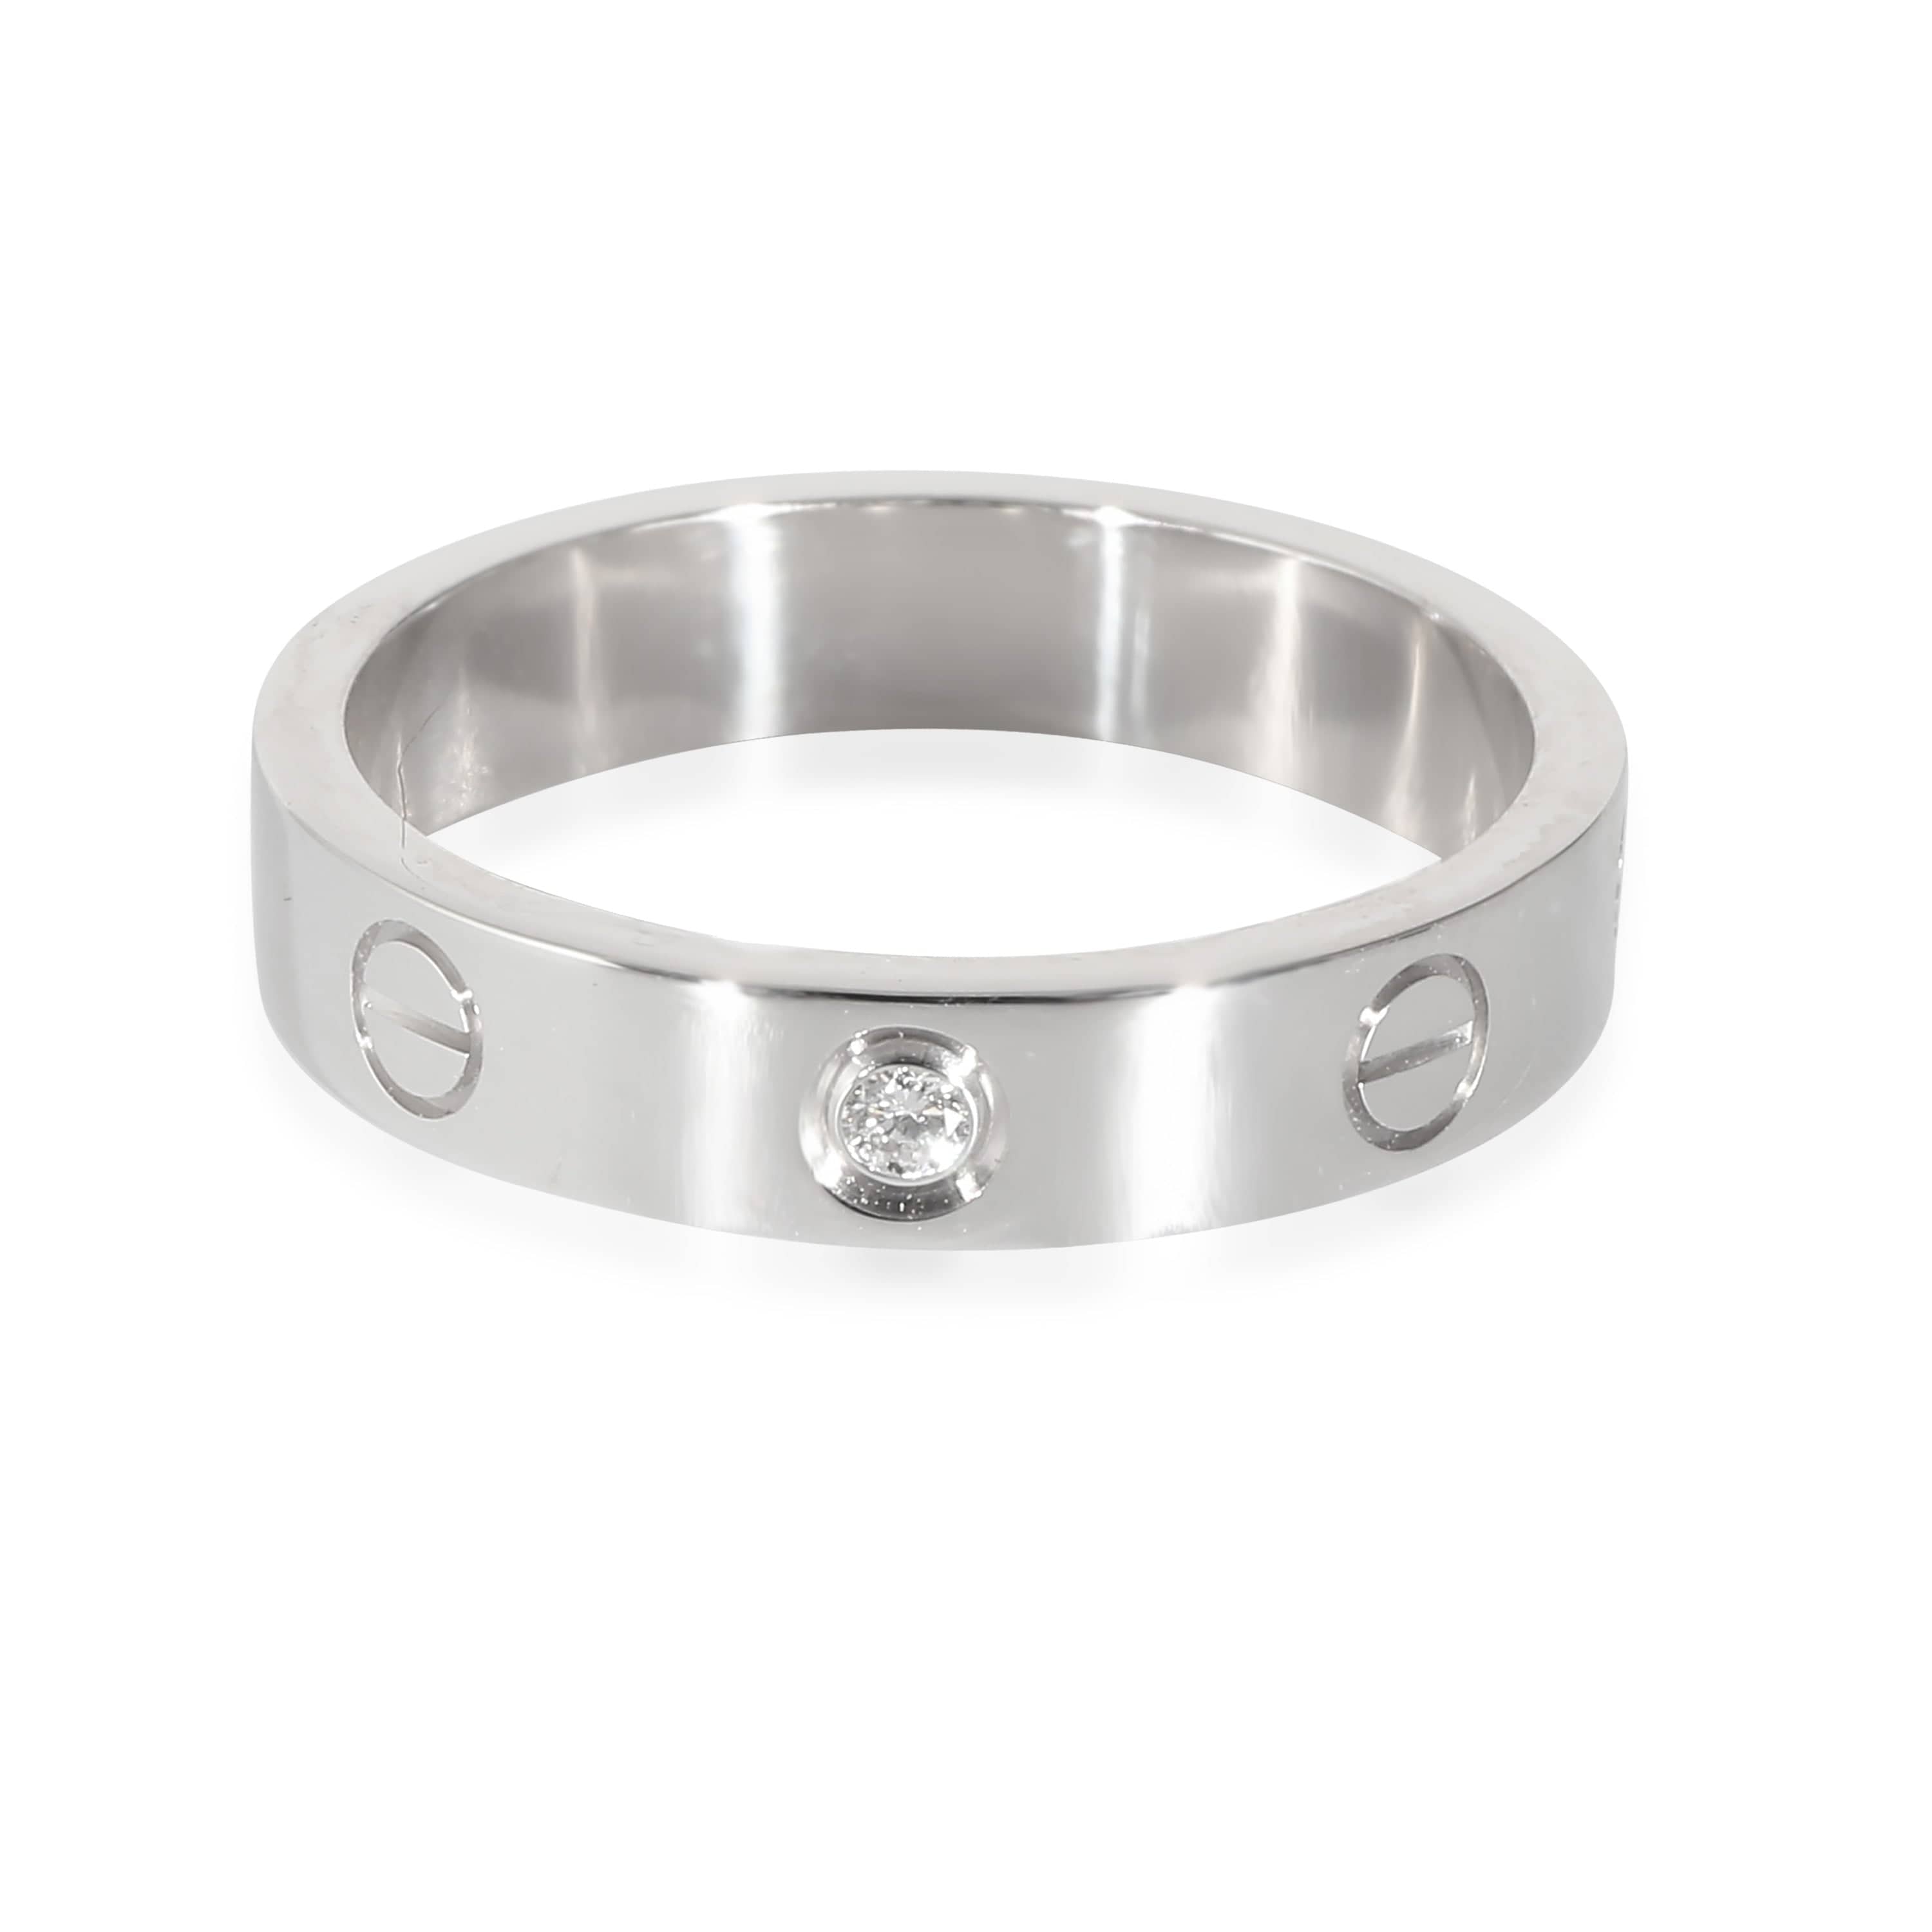 Cartier Cartier Love Band in 18K White Gold 0.02 CTW